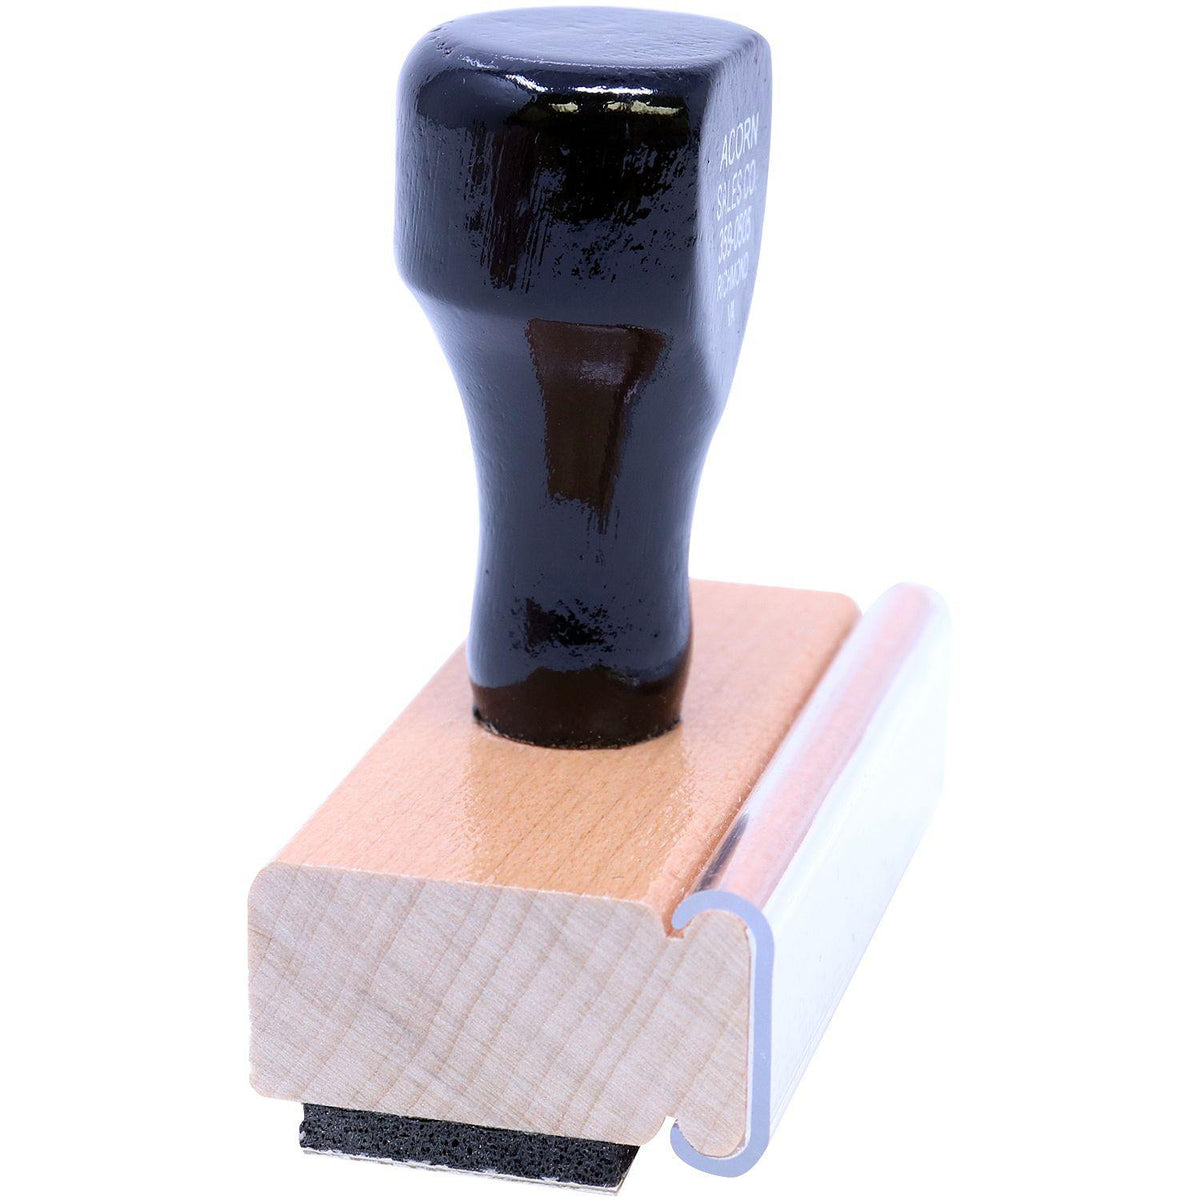 Side View of Large No Epinephrine Rubber Stamp at an Angle